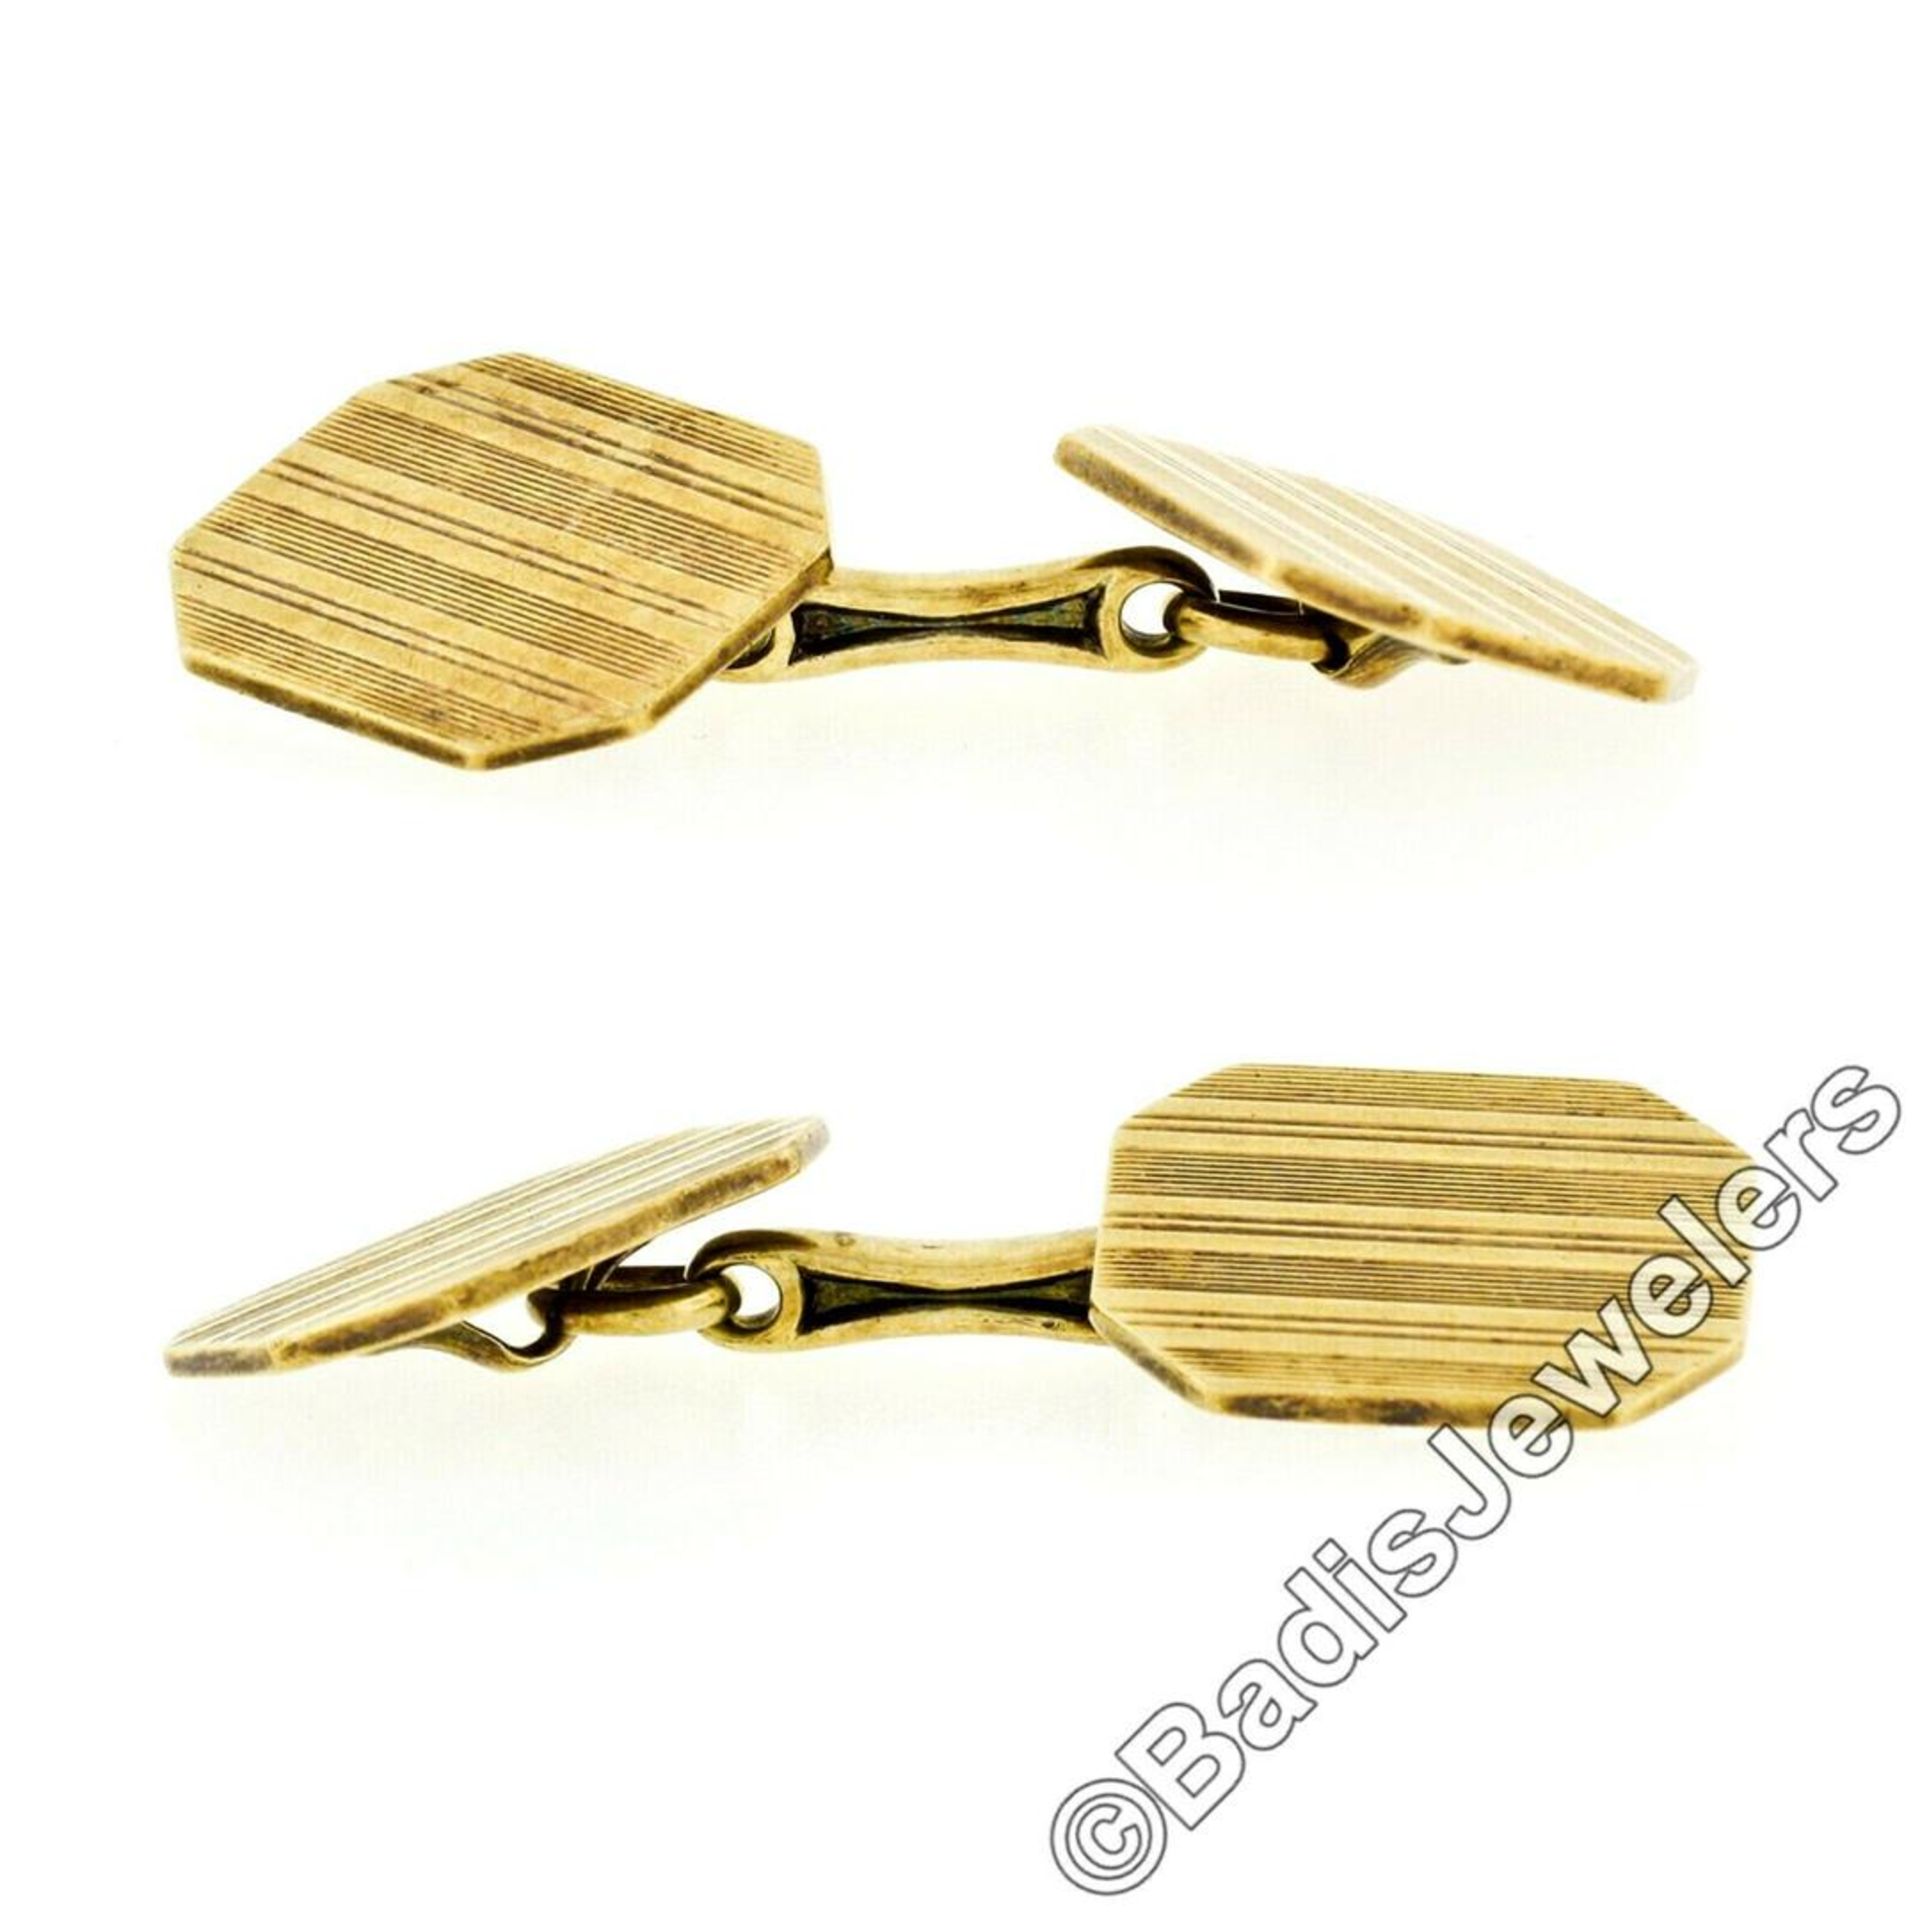 Art Deco 14kt Yellow Gold Grooved Dual Rectangular Panel Cuff Links - Image 3 of 4